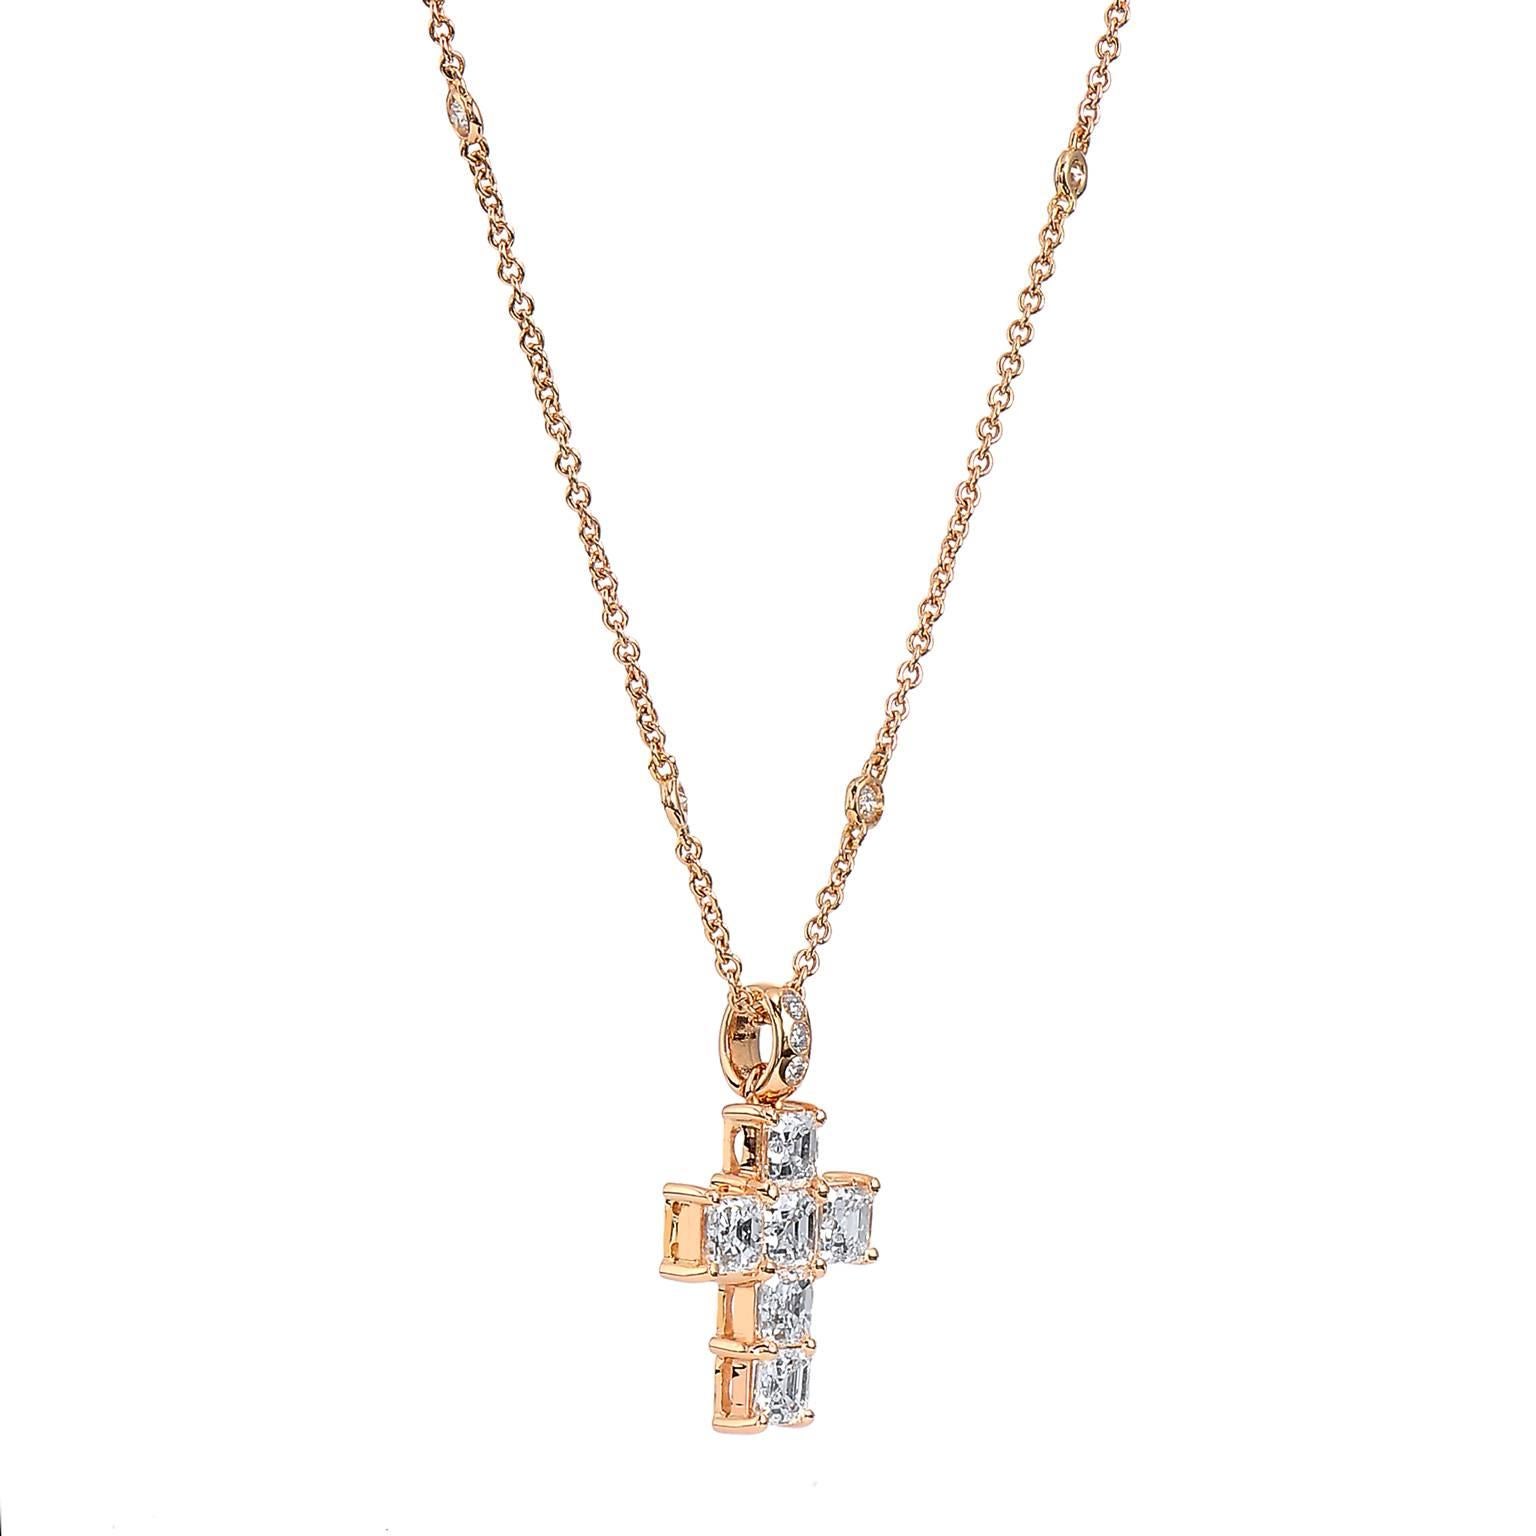 The contrast between the rose gold of the metal and the white diamonds are striking in this cross. With 1.90 carat of Asher cut diamonds prong set in cross shape and 0.29 carat of diamond bezel set scattered throughout the length of the chain, this